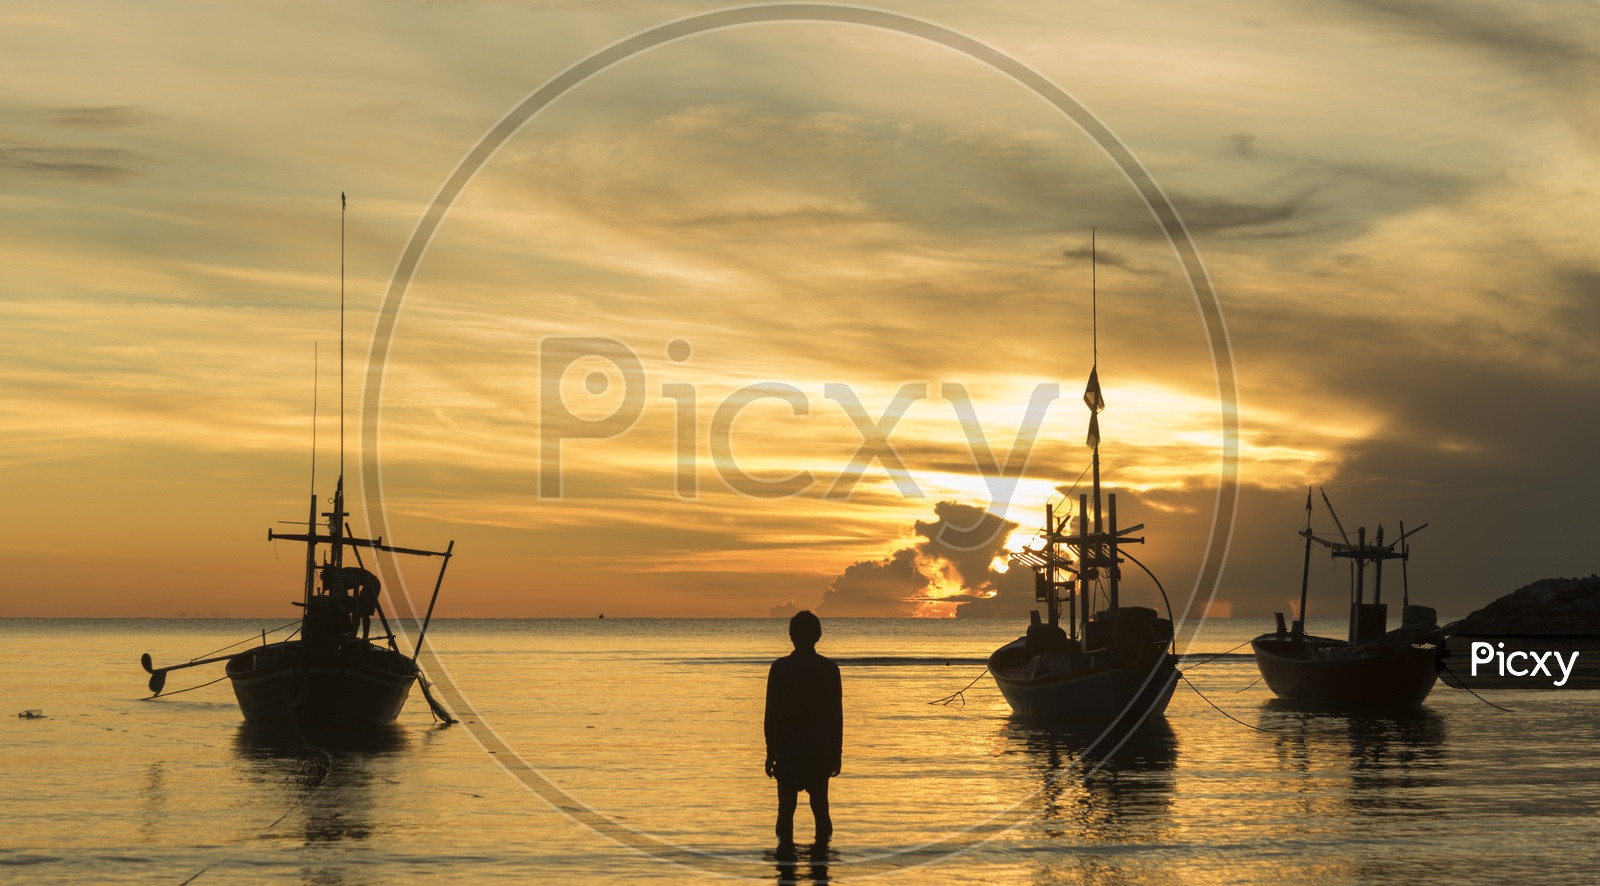 Fishing Boats In a Beach With  Fisherman Carrying Their Catch Over a Golden Sunset Sky In Background